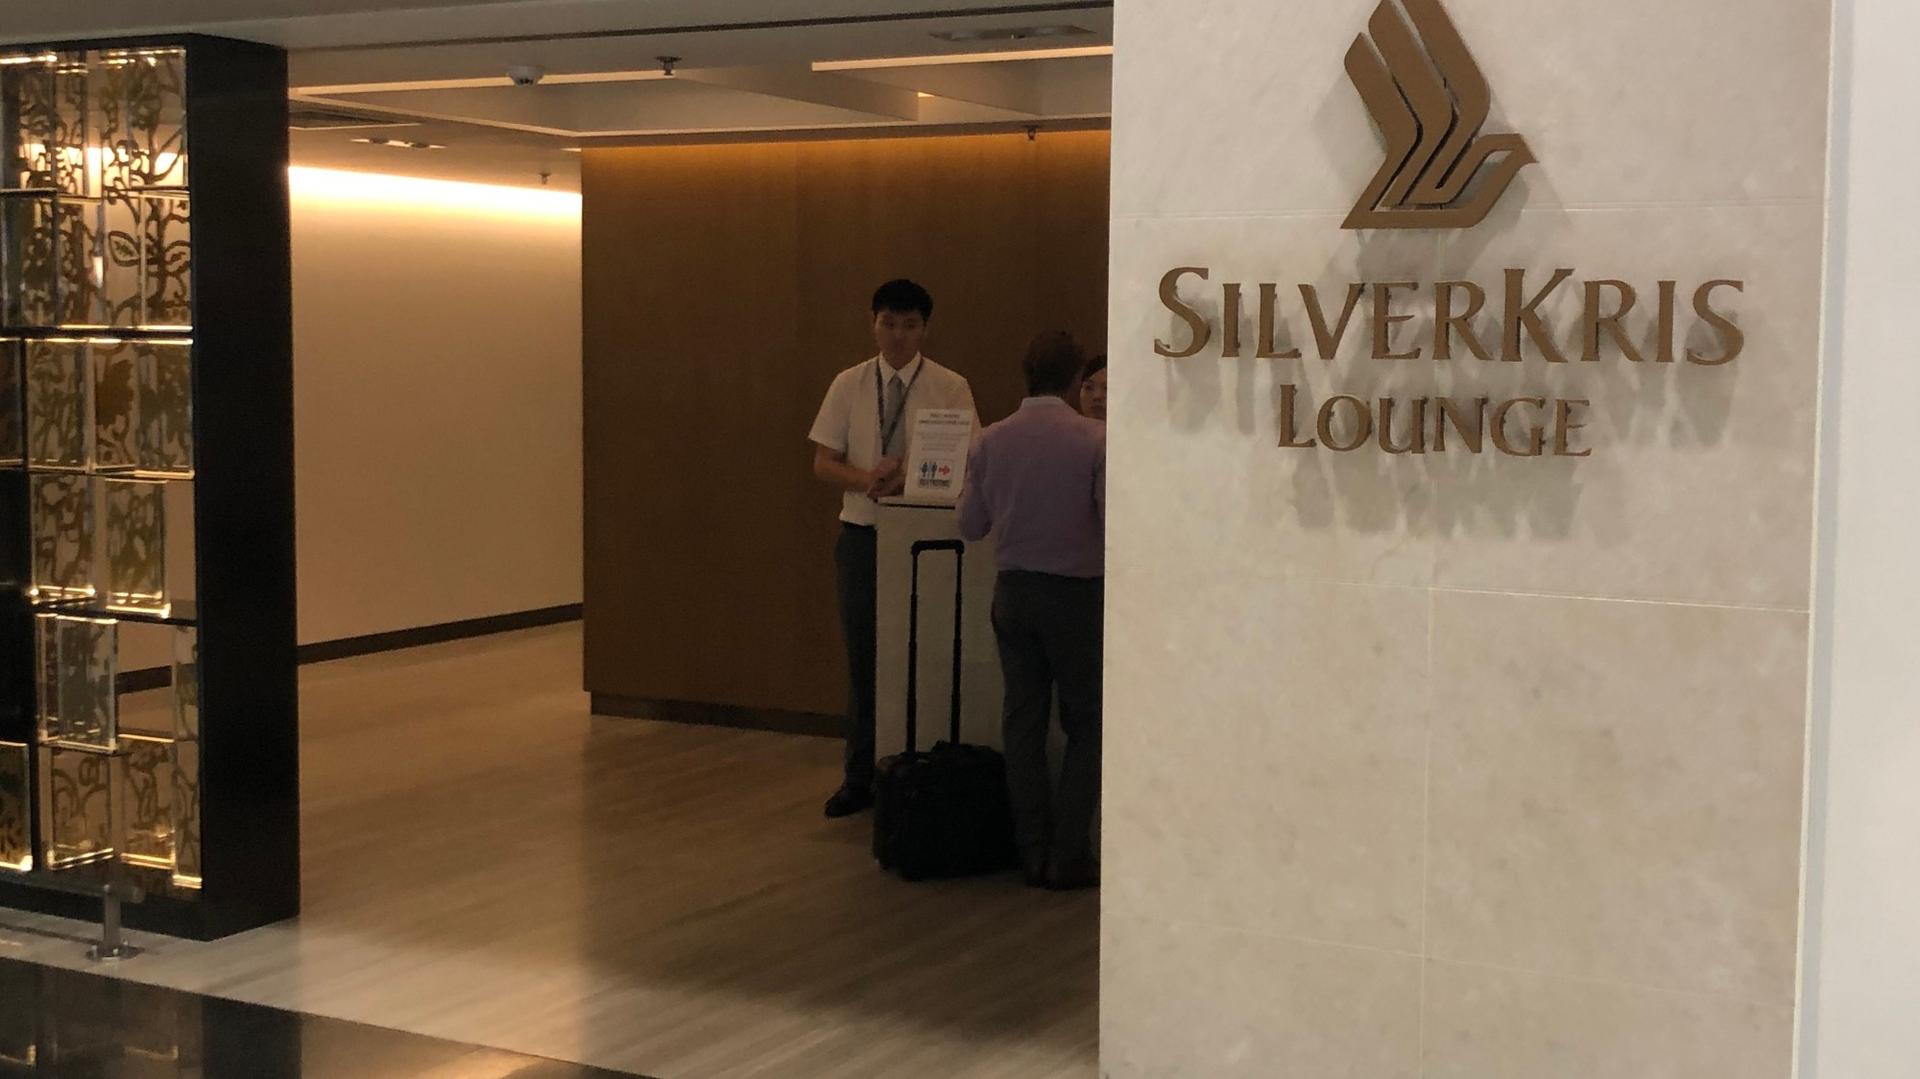 Singapore Airlines SilverKris Business Class Lounge image 49 of 68